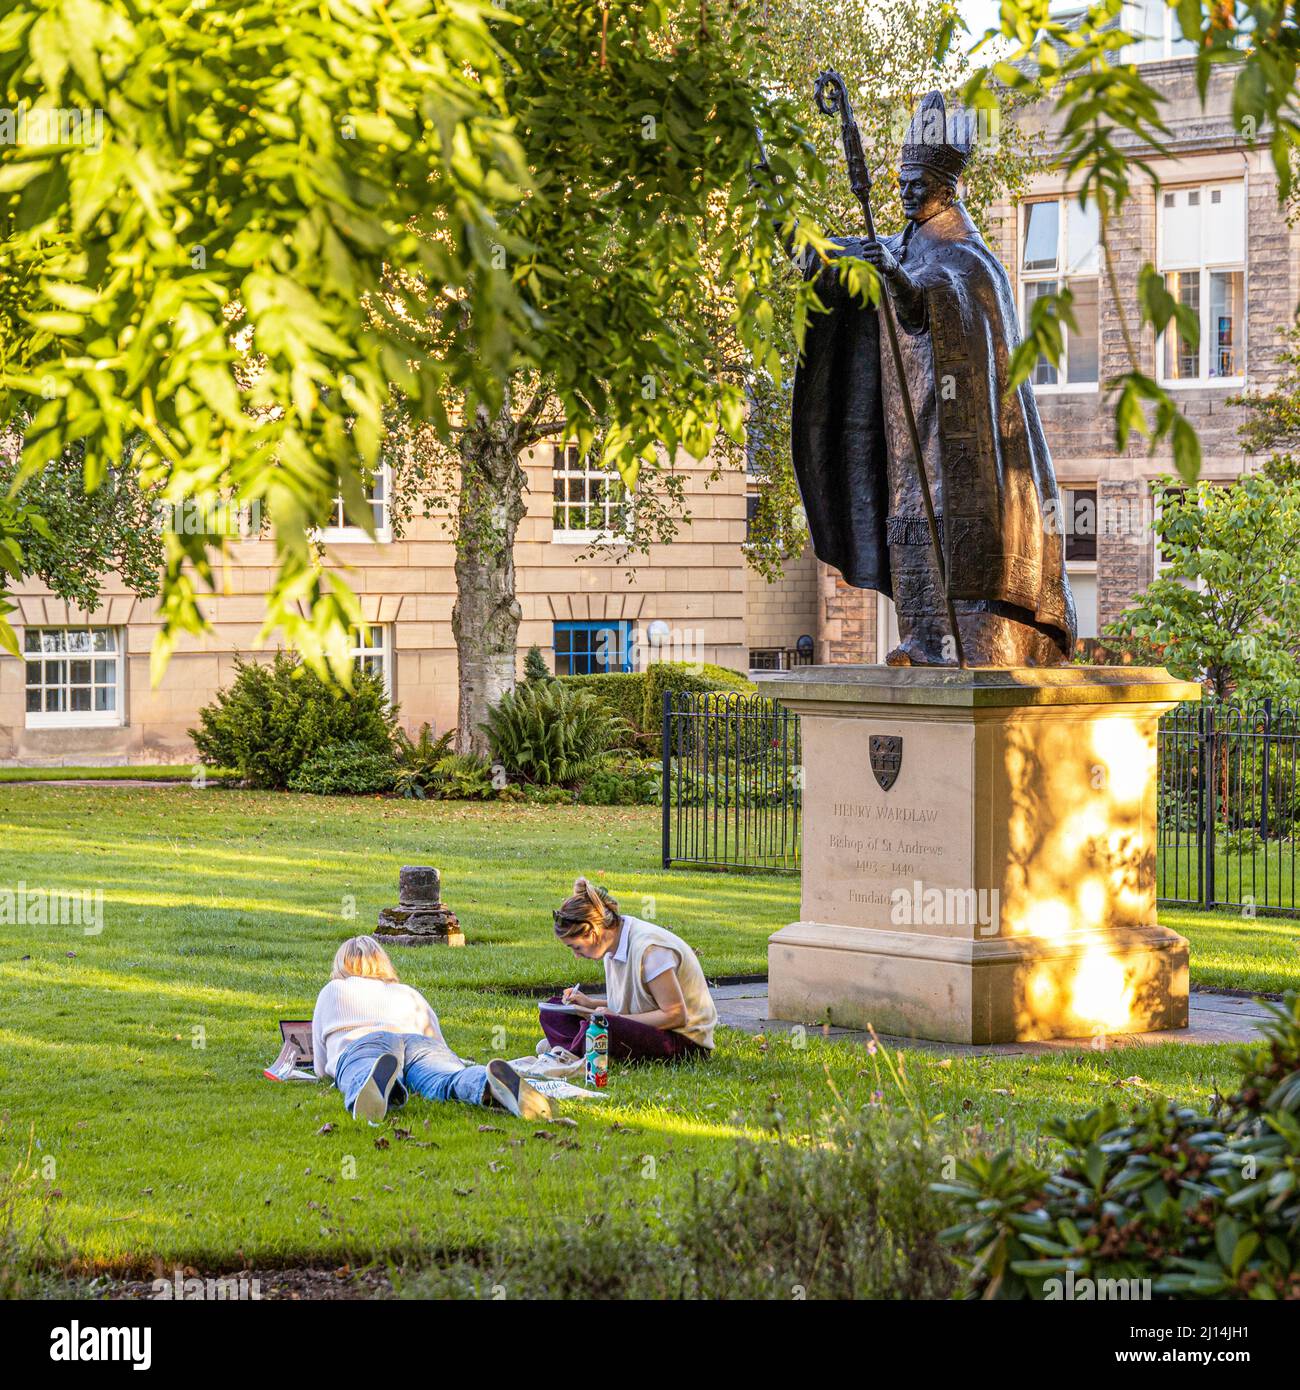 The statue of Bishop Henry Wardlaw watching over two female students studying in St Marys College Quadrangle, University of St Andrews, Fife, Scotland Stock Photo